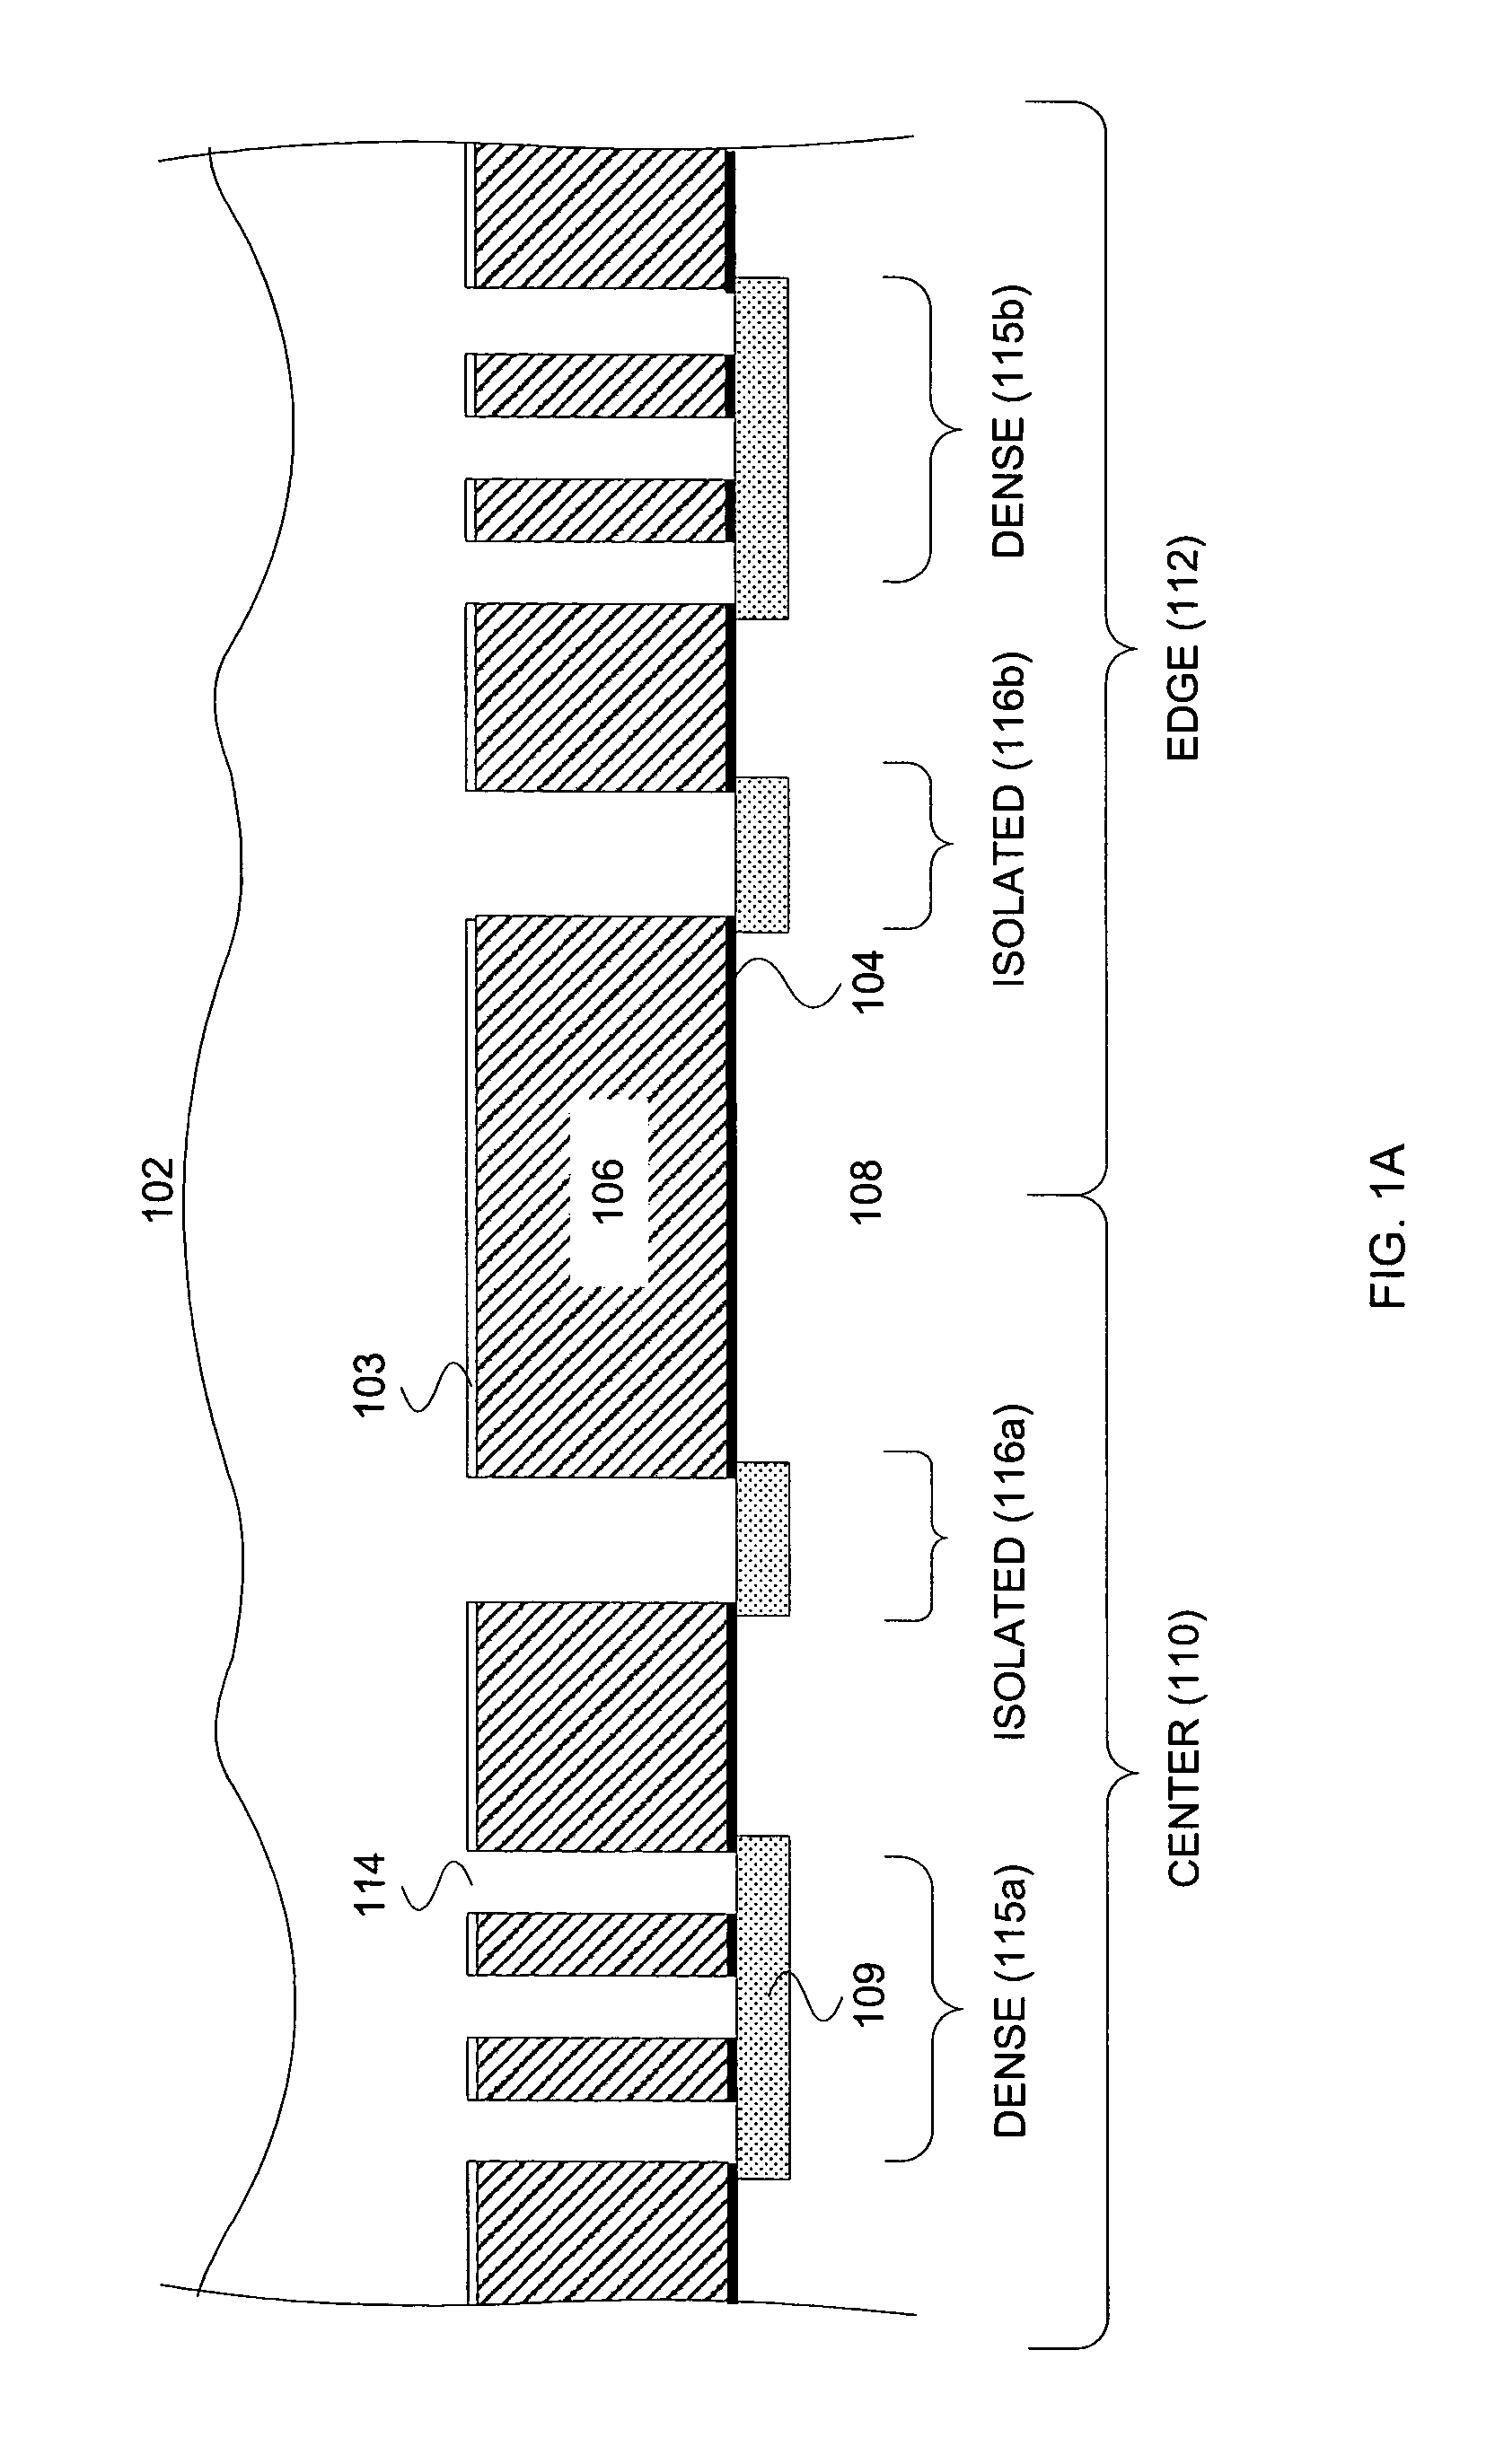 Methods and apparatus for the optimization of photo resist etching in a plasma processing system